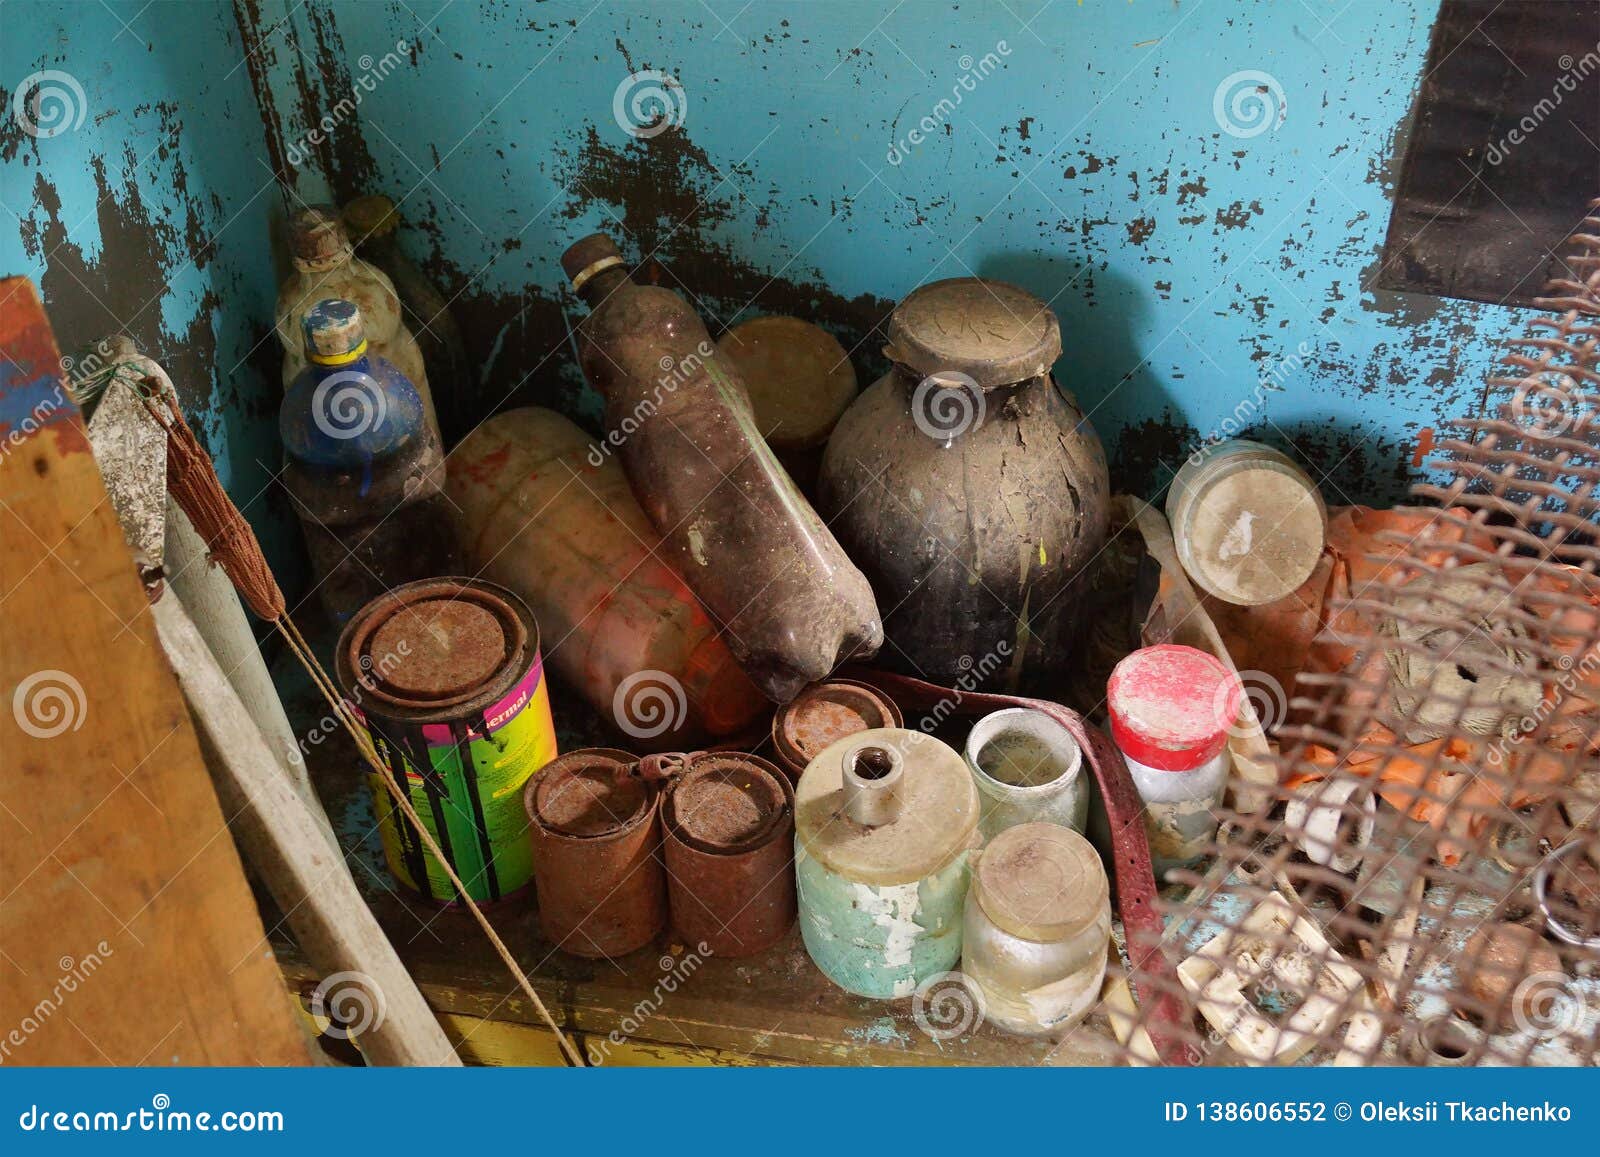 Old Paint Cans and Bottles in an Abandoned Workshop Stock Photo - Image ...